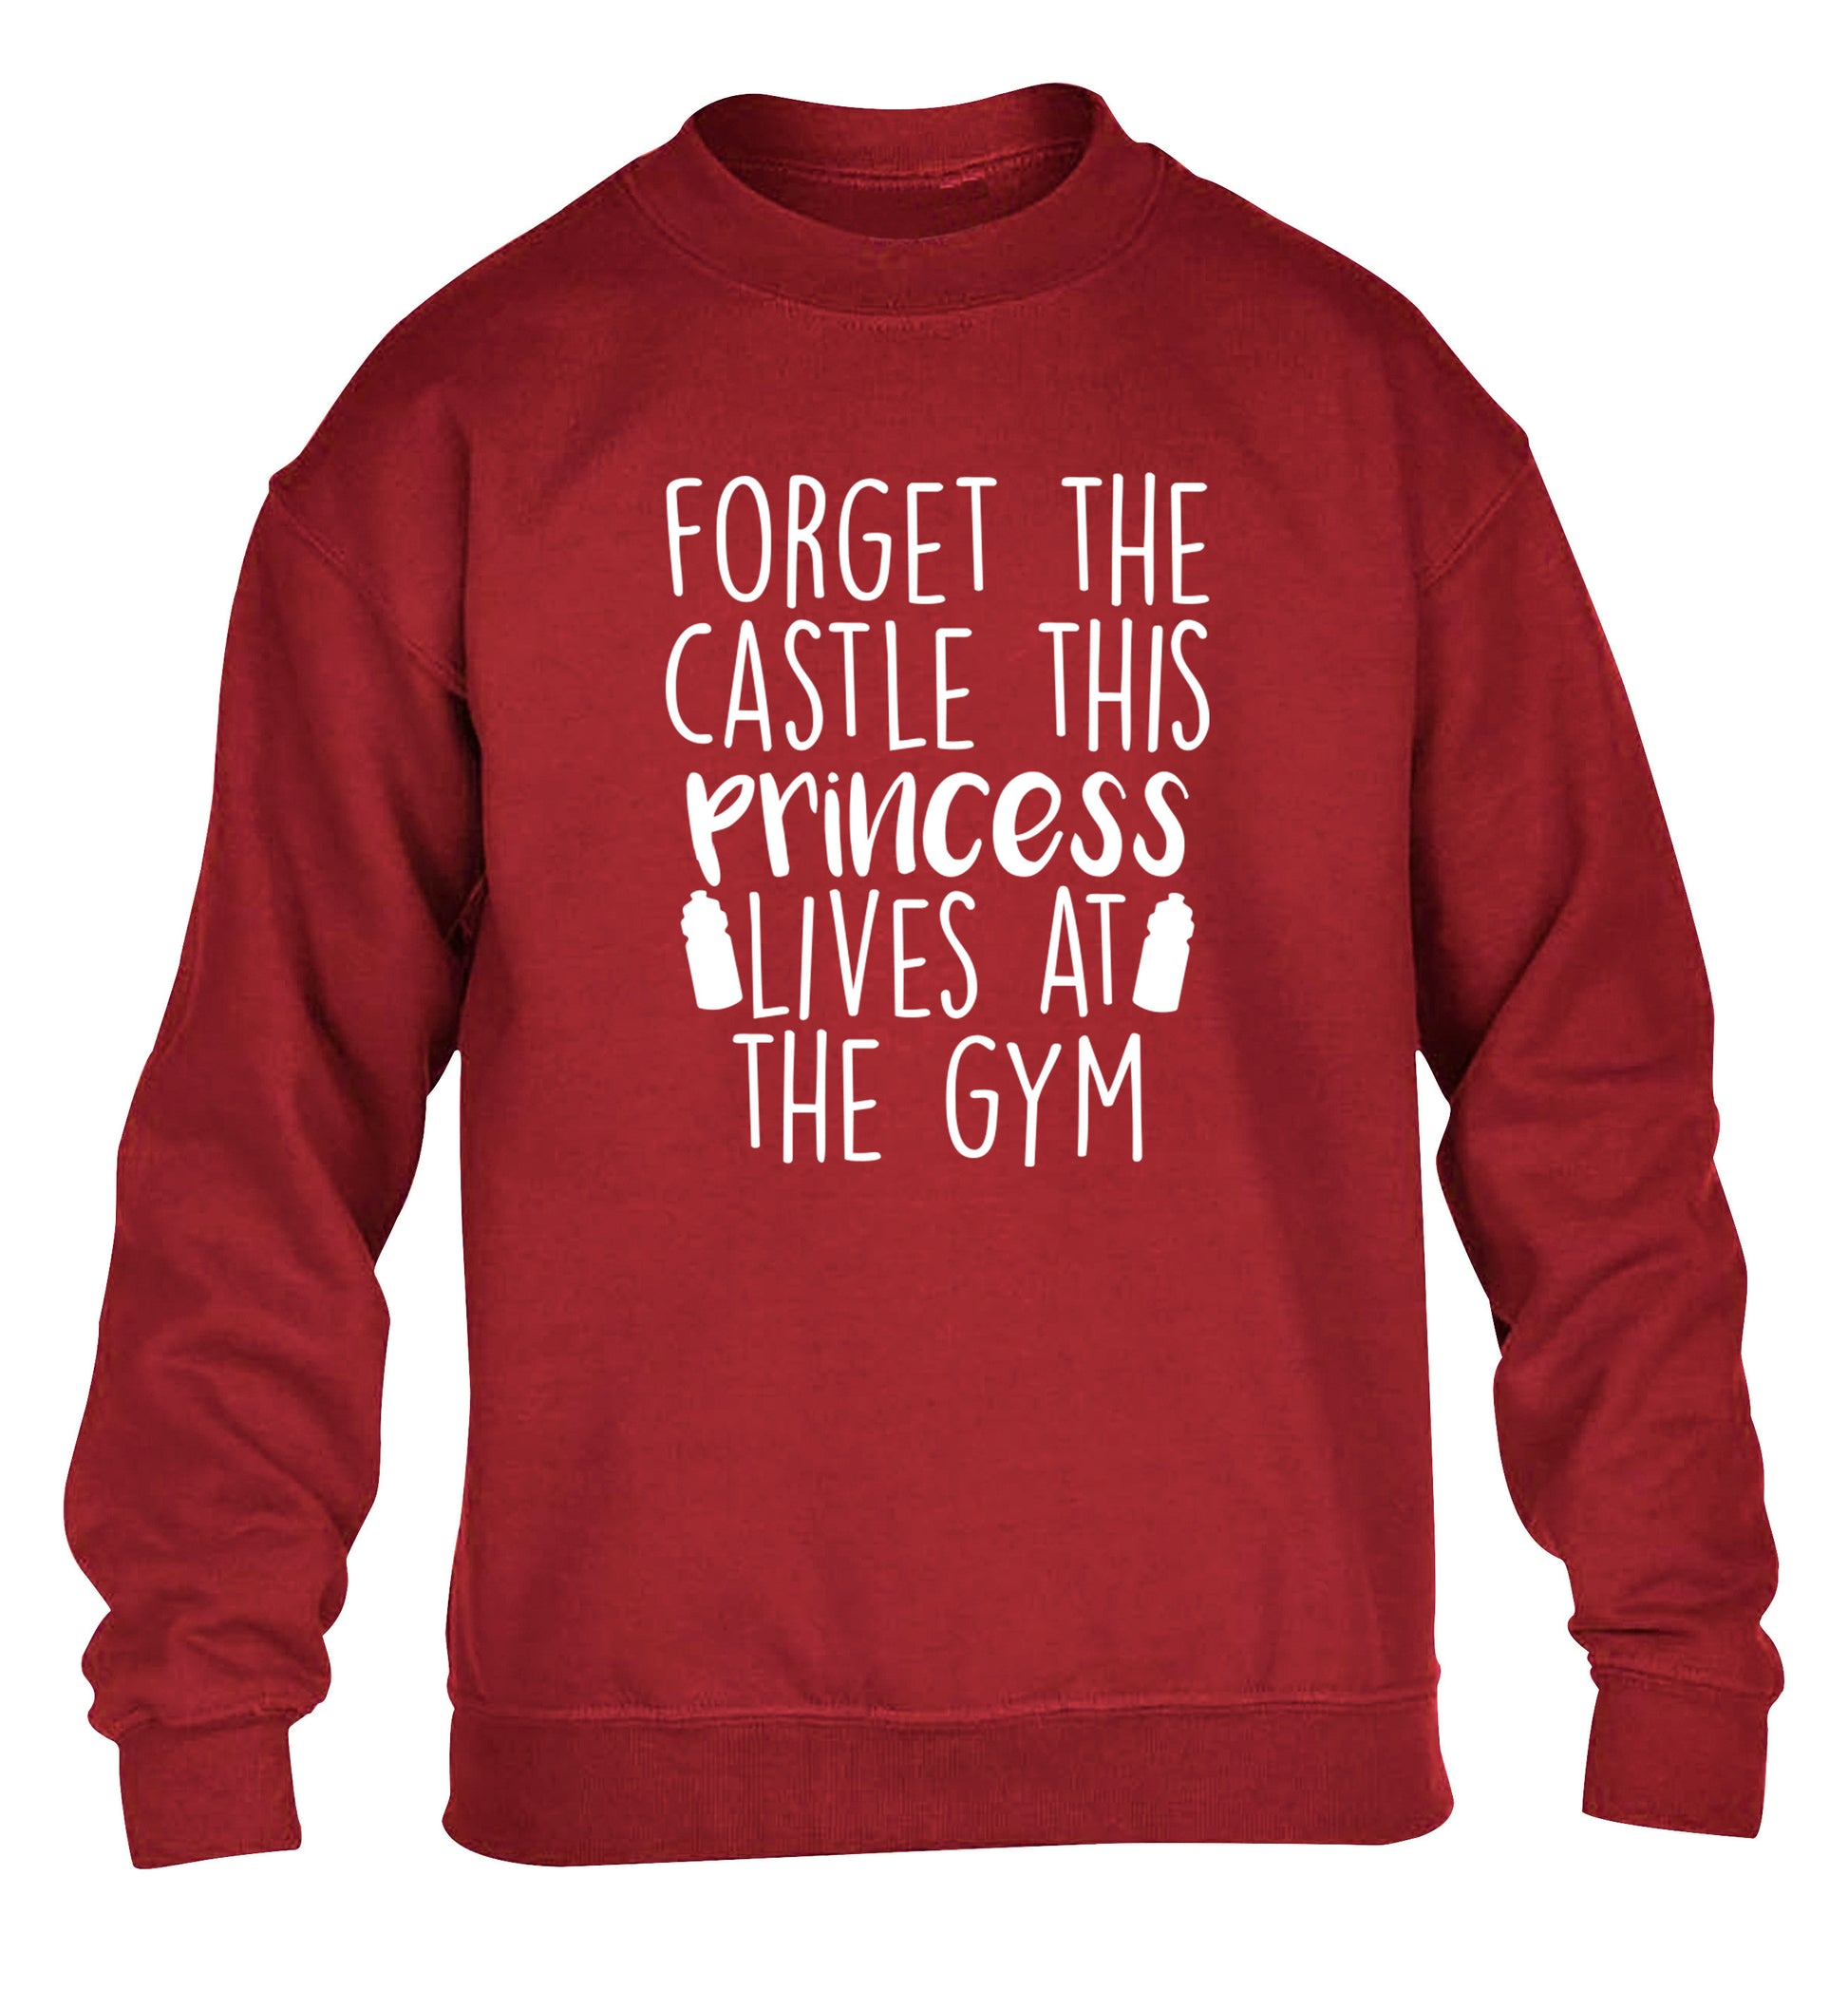 Forget the castle this princess lives at the gym children's grey sweater 12-14 Years